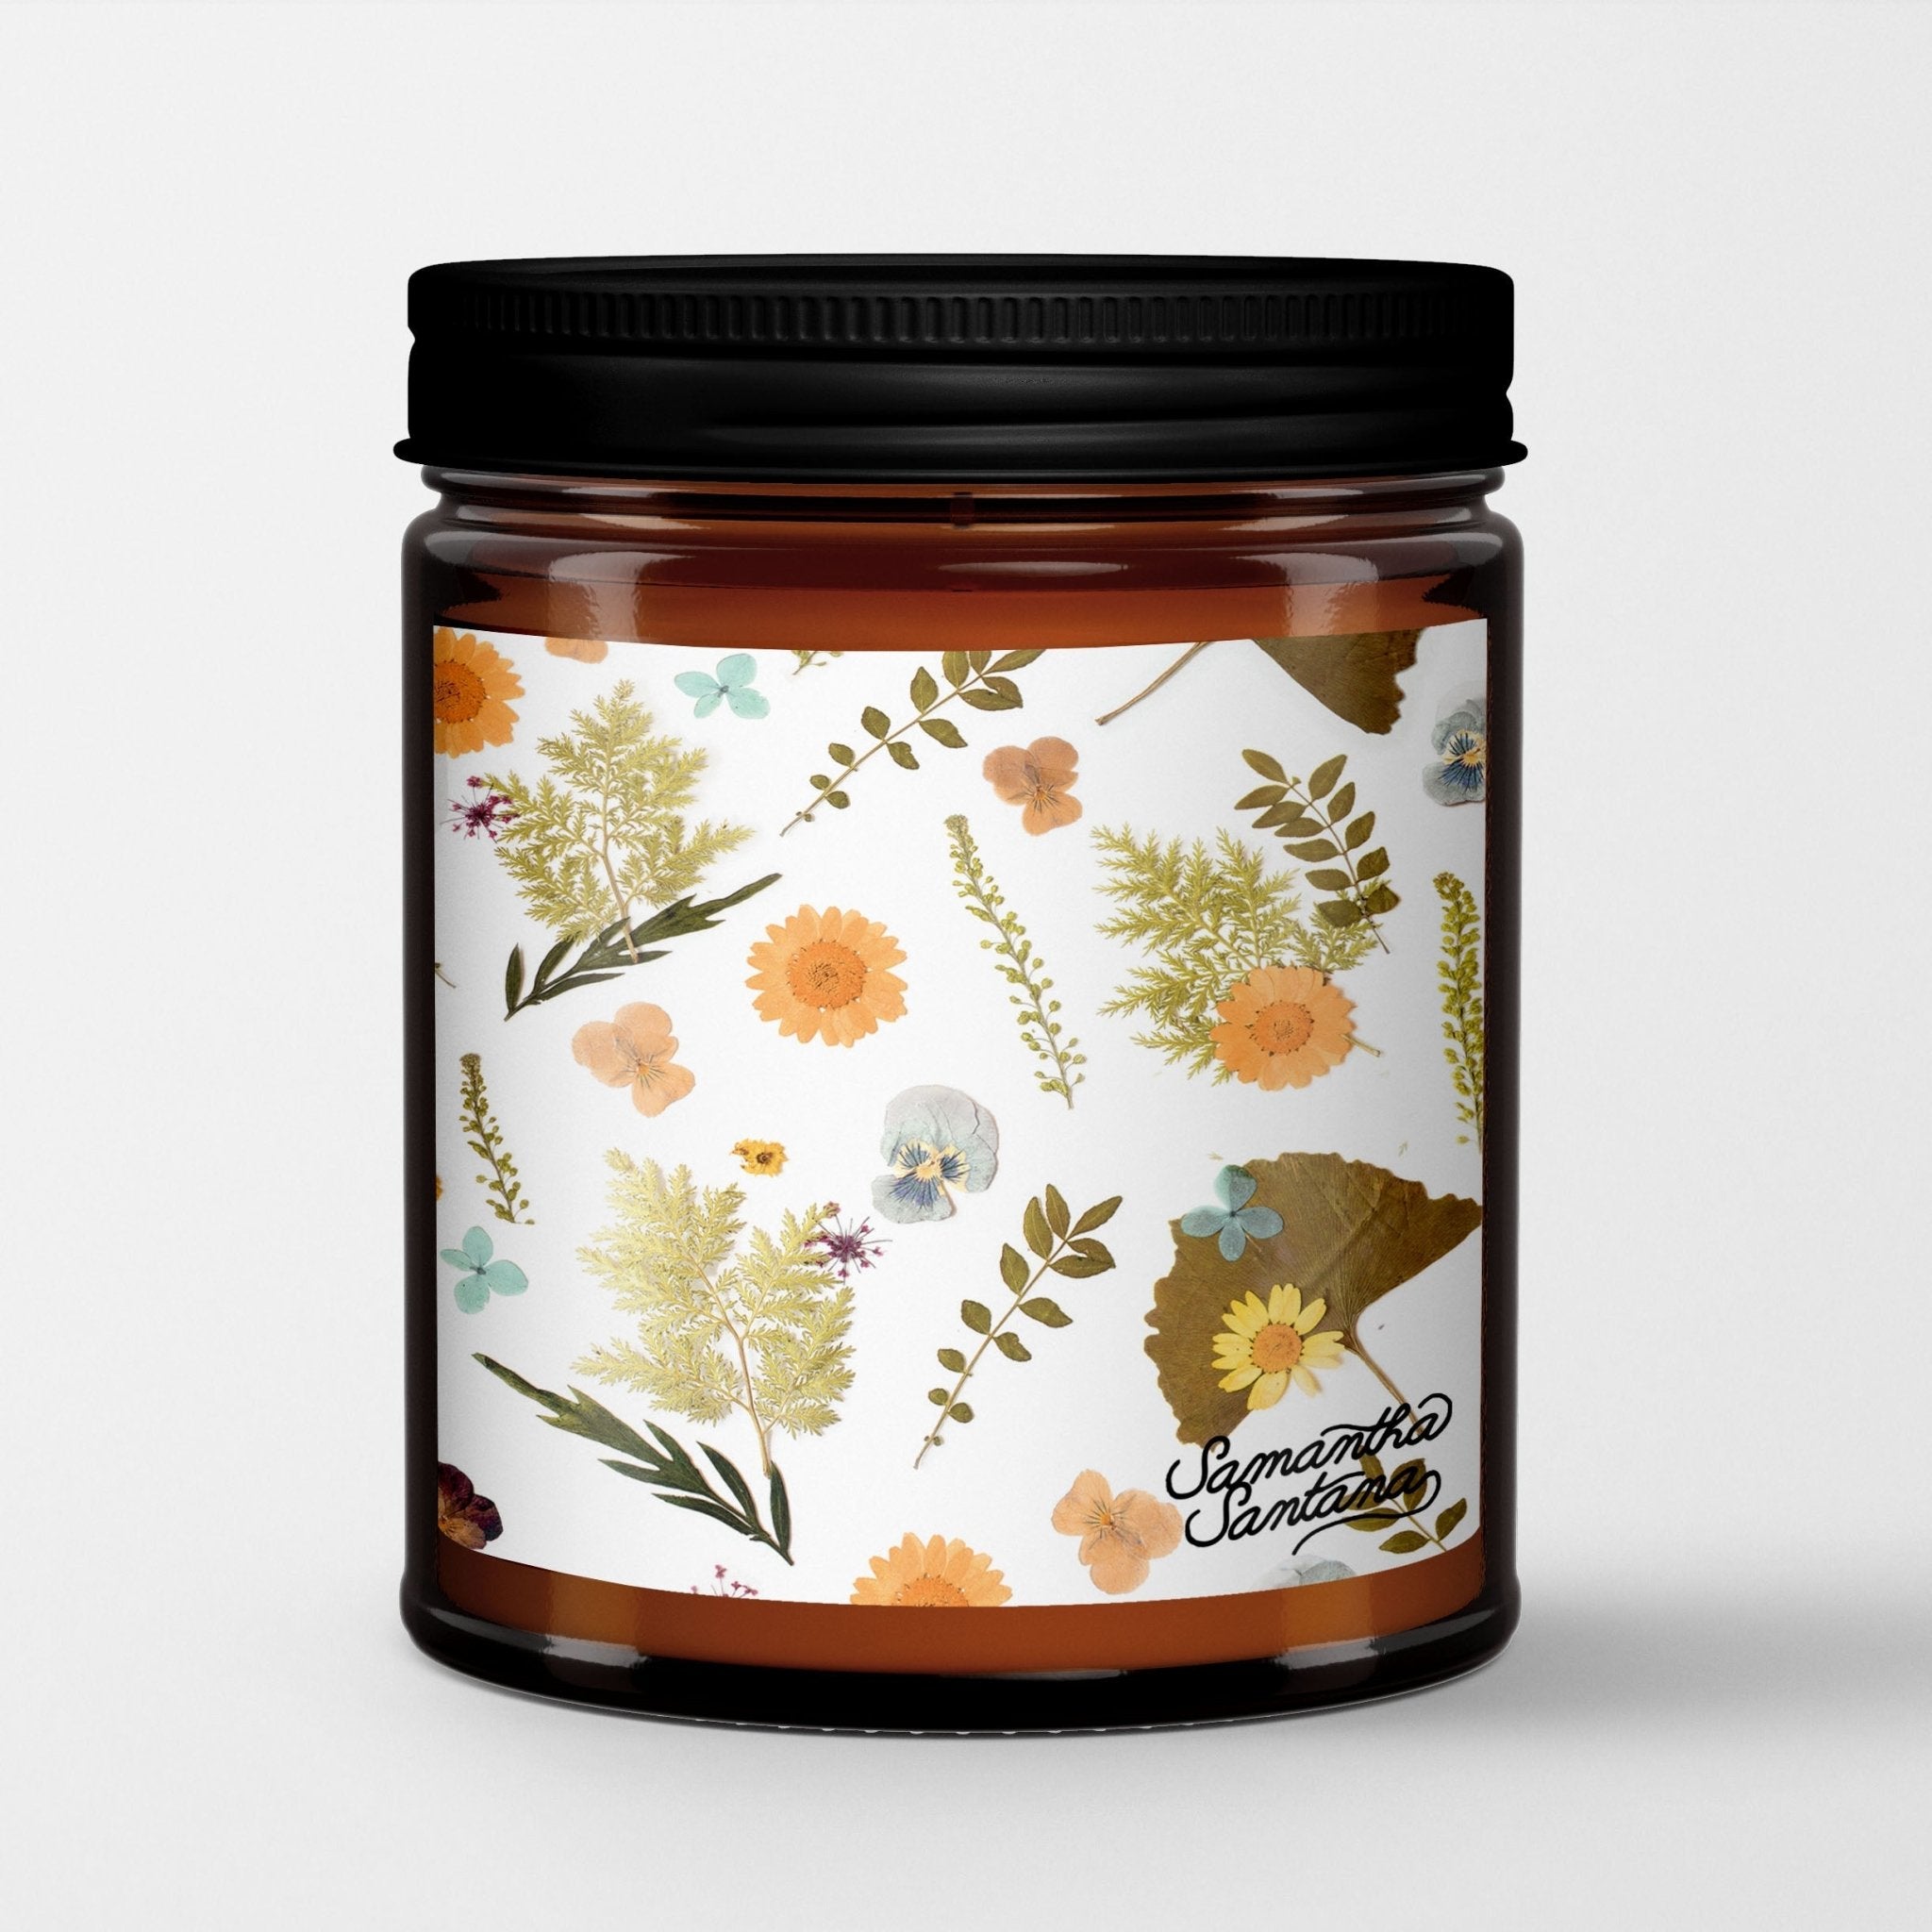 Samantha Santana Scented Candle in Amber Glass Jar: Pressed Flowers - Candlefy